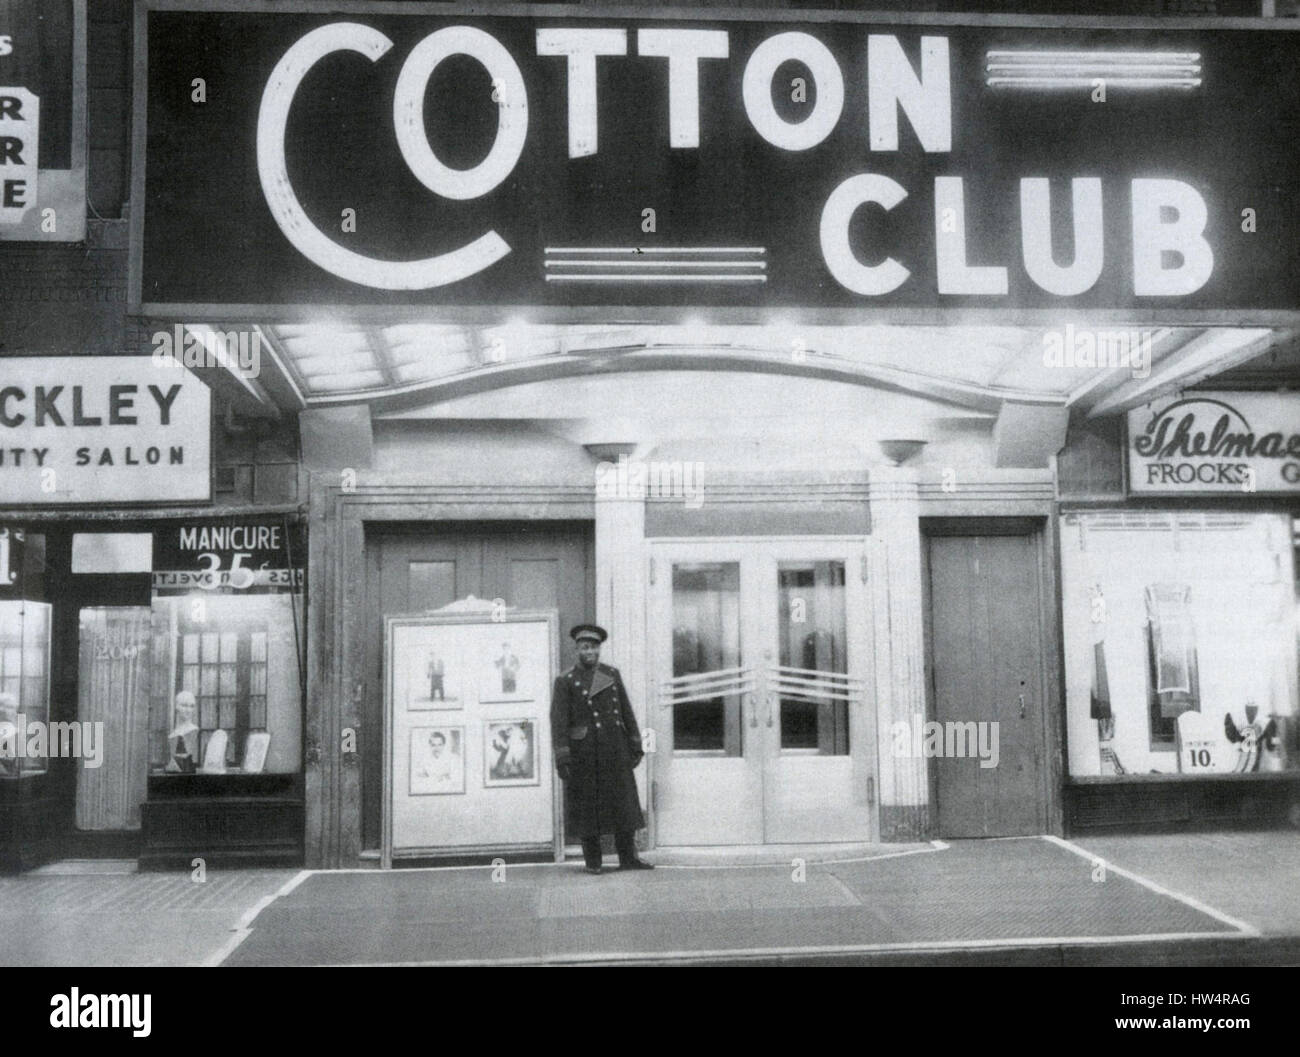 Cotton Club High Resolution Stock Photography and Images - Alamy